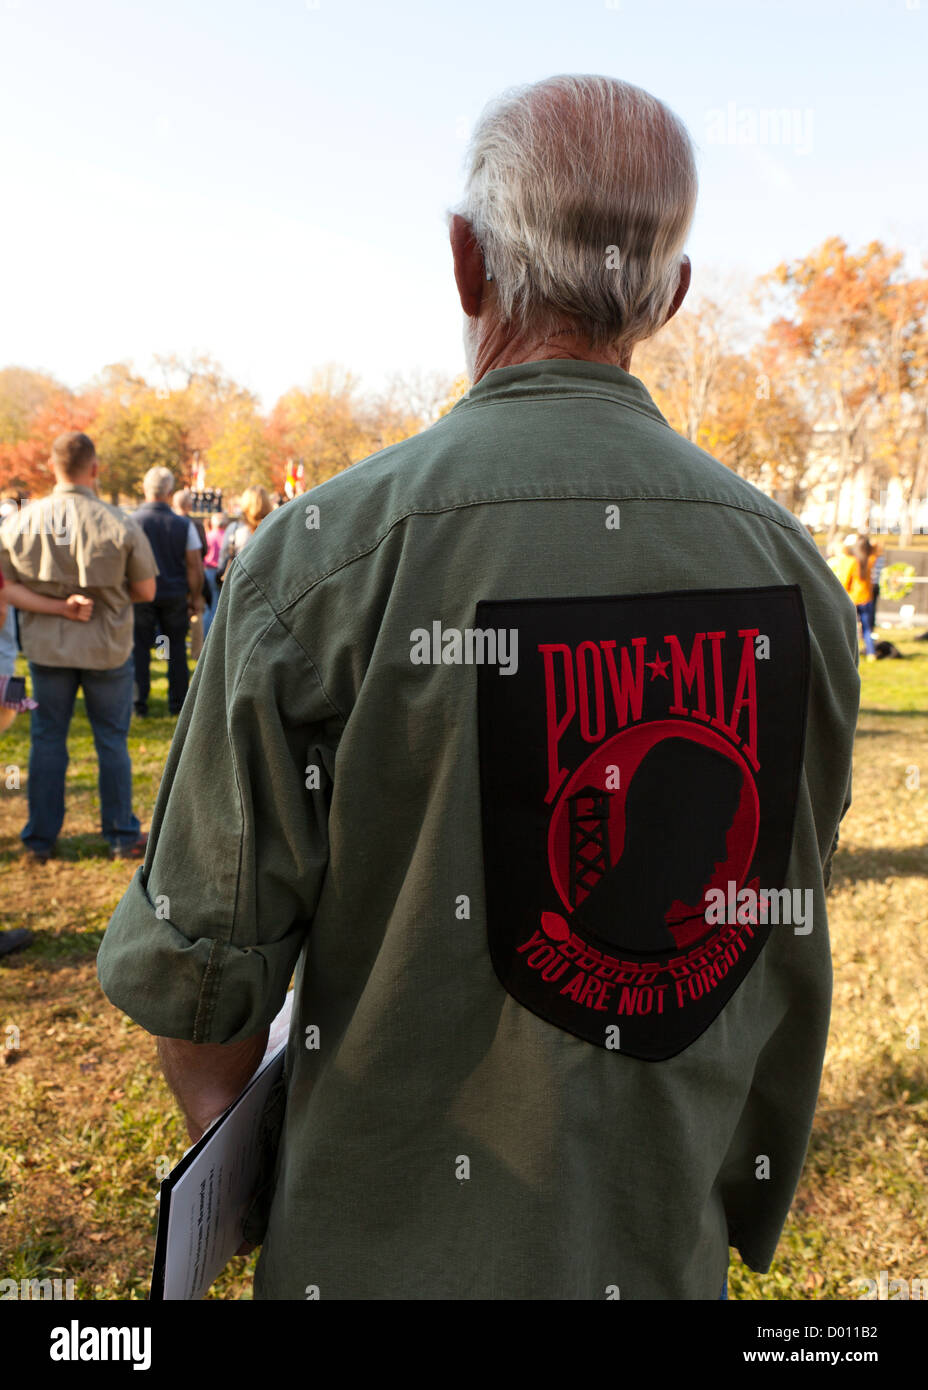 Vietnam war veteran wearing military fatigues with a large POW MIA patch Stock Photo